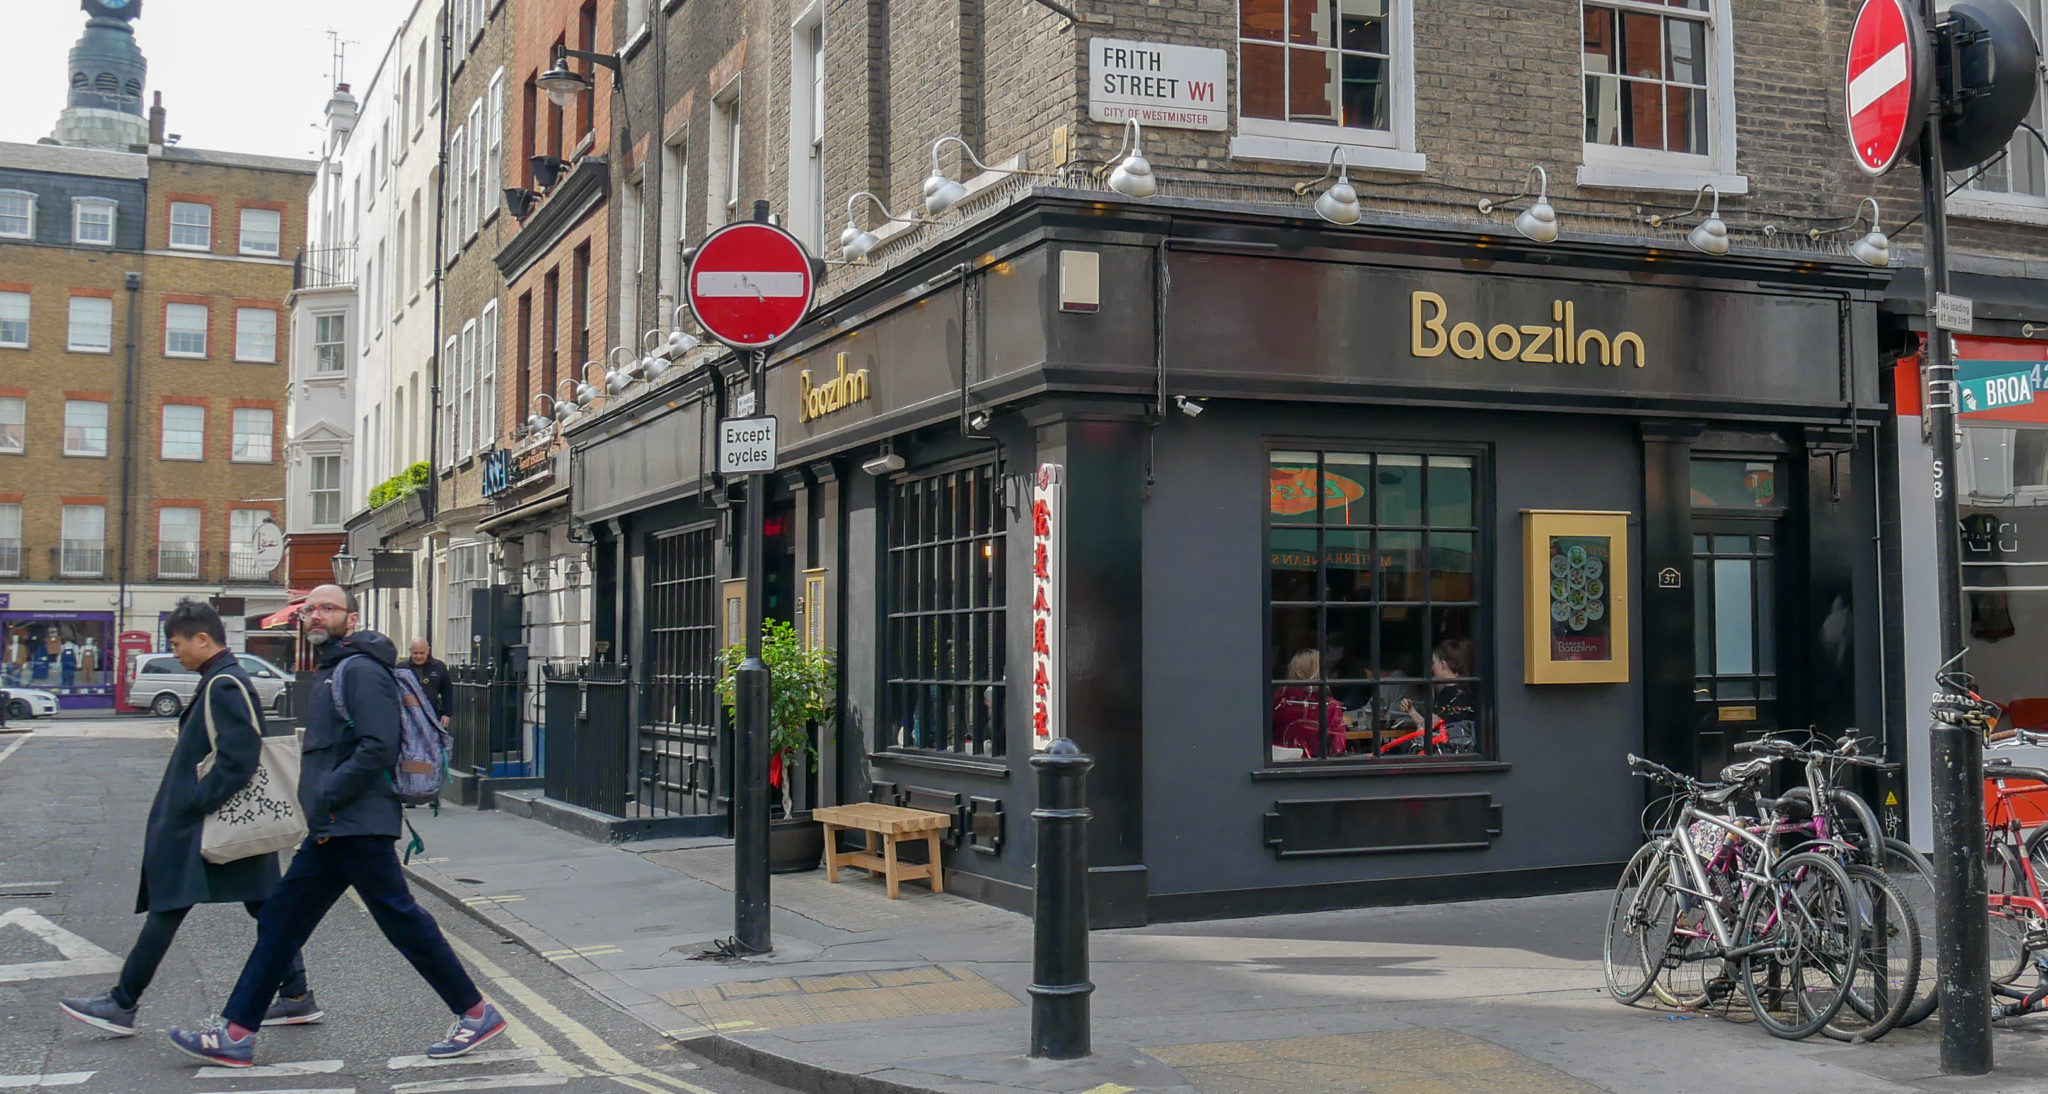 the black walls and sign of Boazilnn restaurant on the corner of Frith Street and Romilly Street, Soho, London